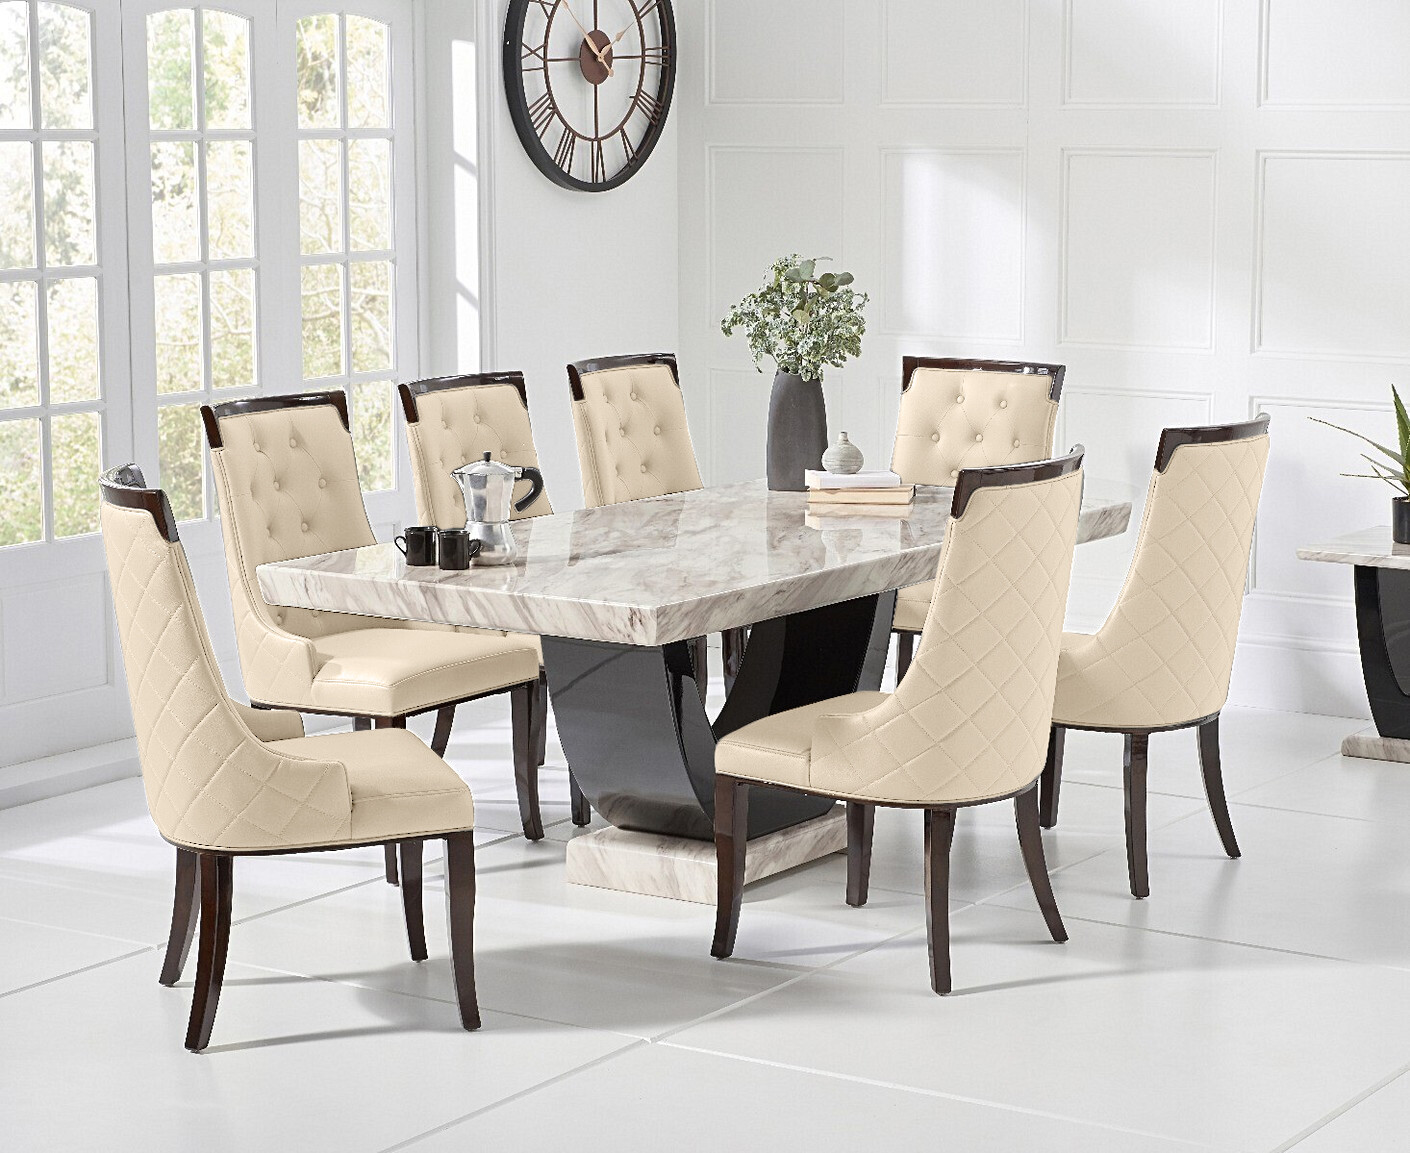 Photo 2 of Novara 200cm cream and black pedestal marble dining table with 12 grey francesca chairs